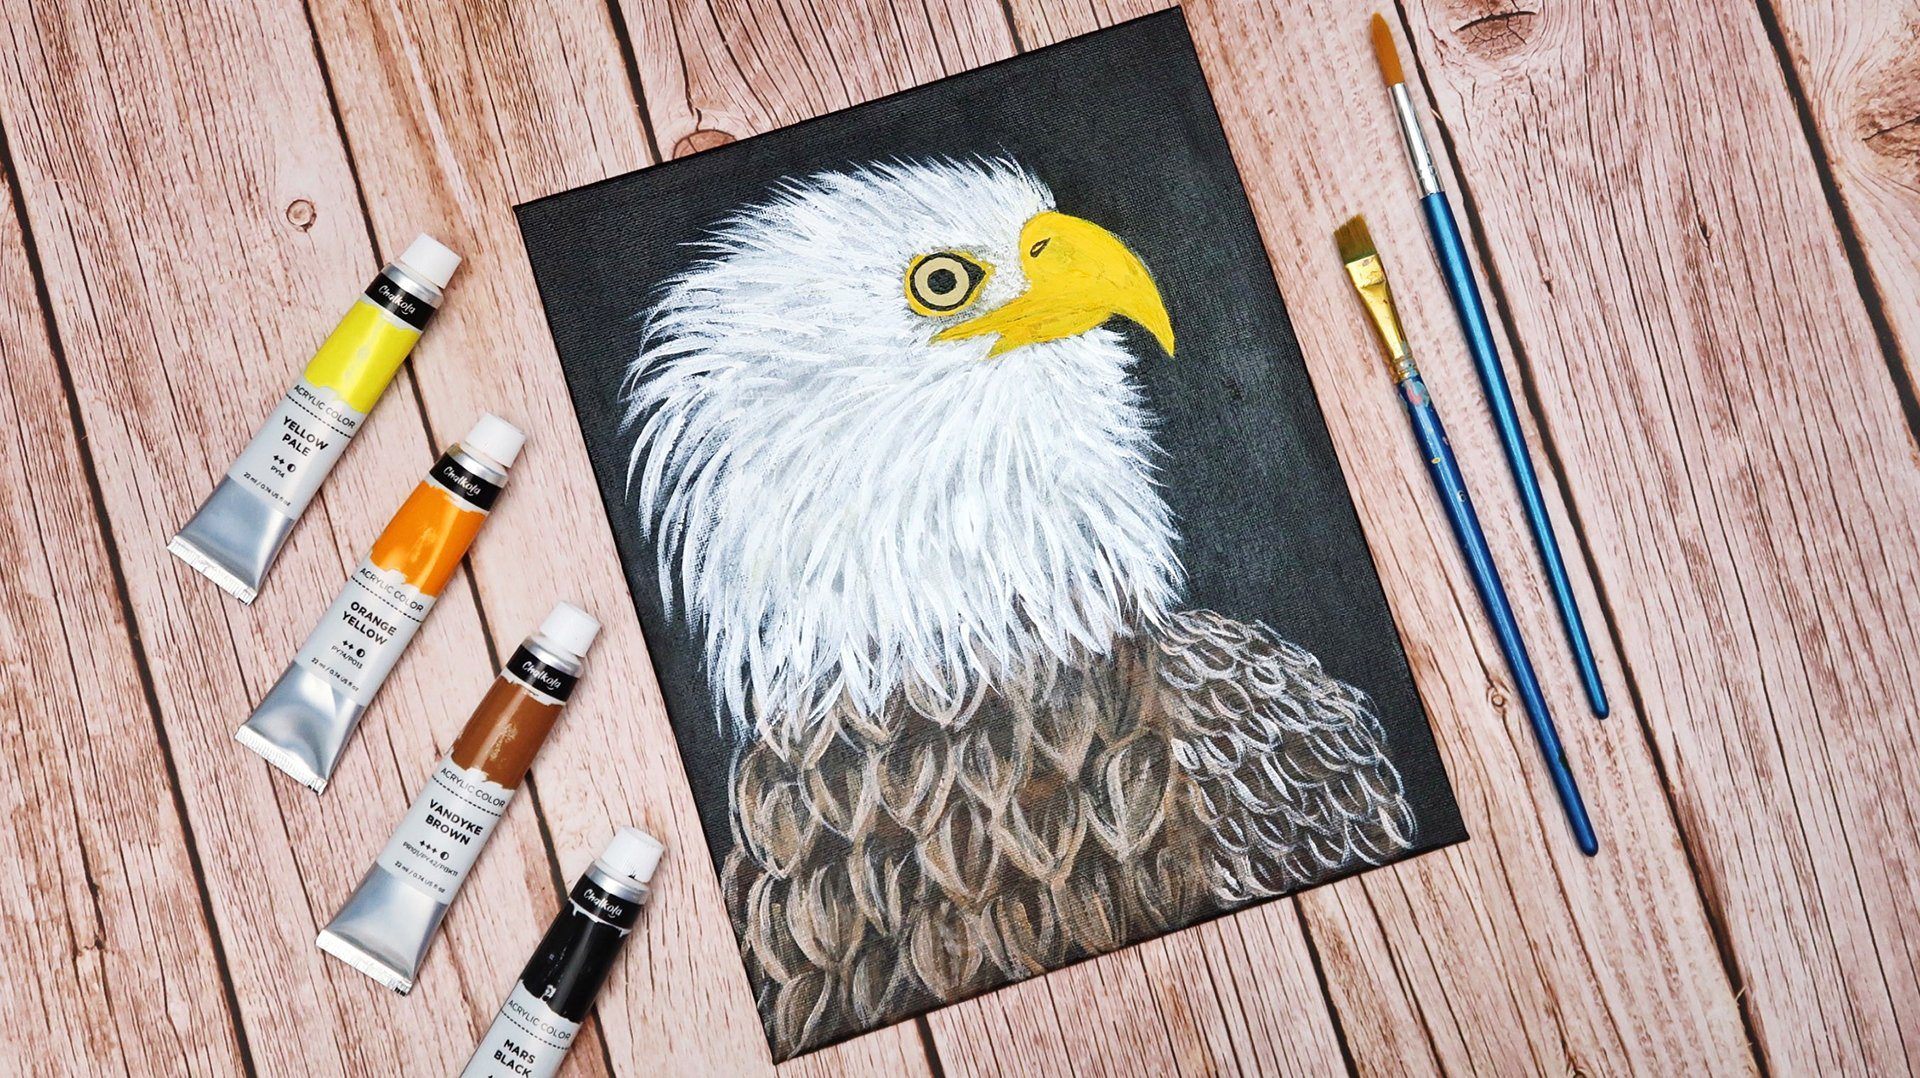 HOW TO: Paint an Eagle Using Acrylics